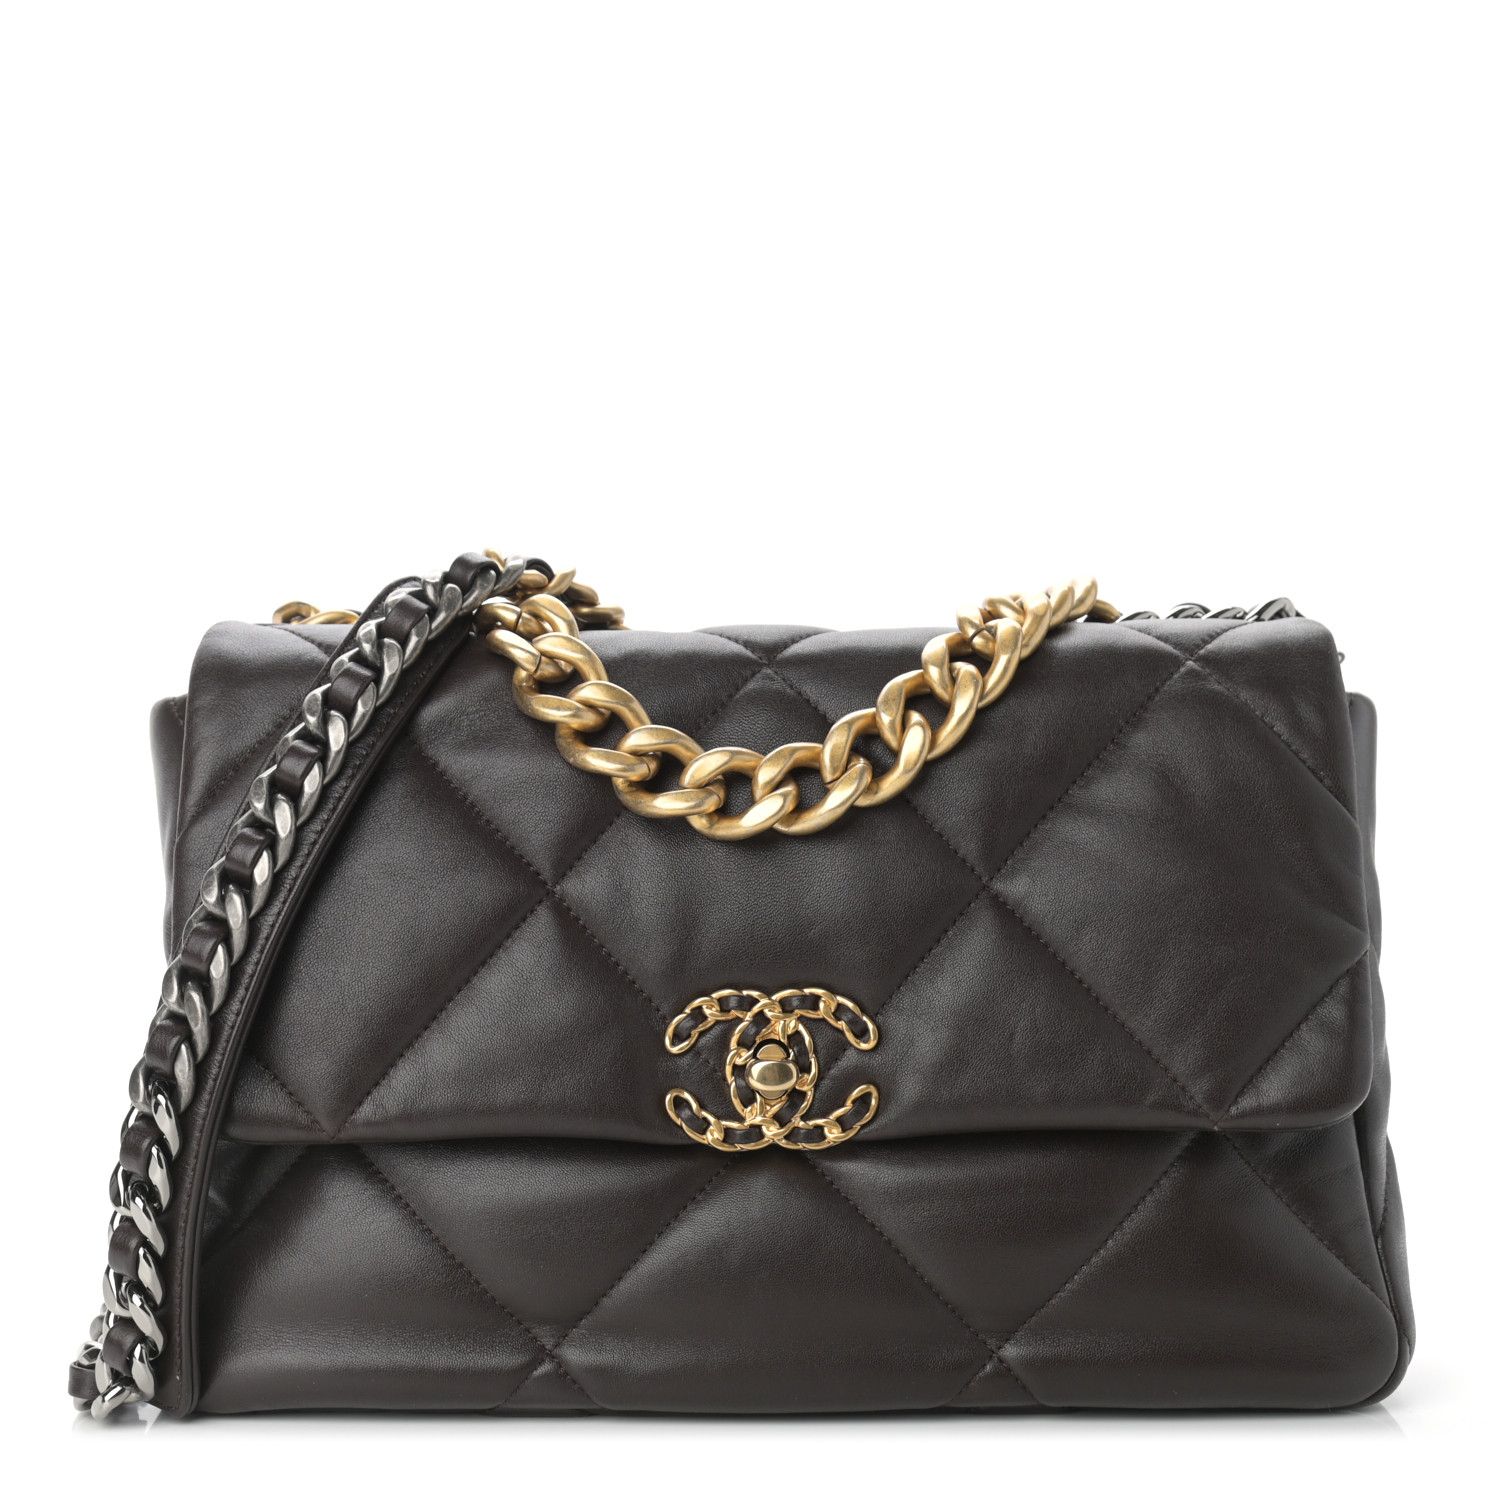 CHANEL

Lambskin Quilted Large Chanel 19 Flap Dark Brown | Fashionphile